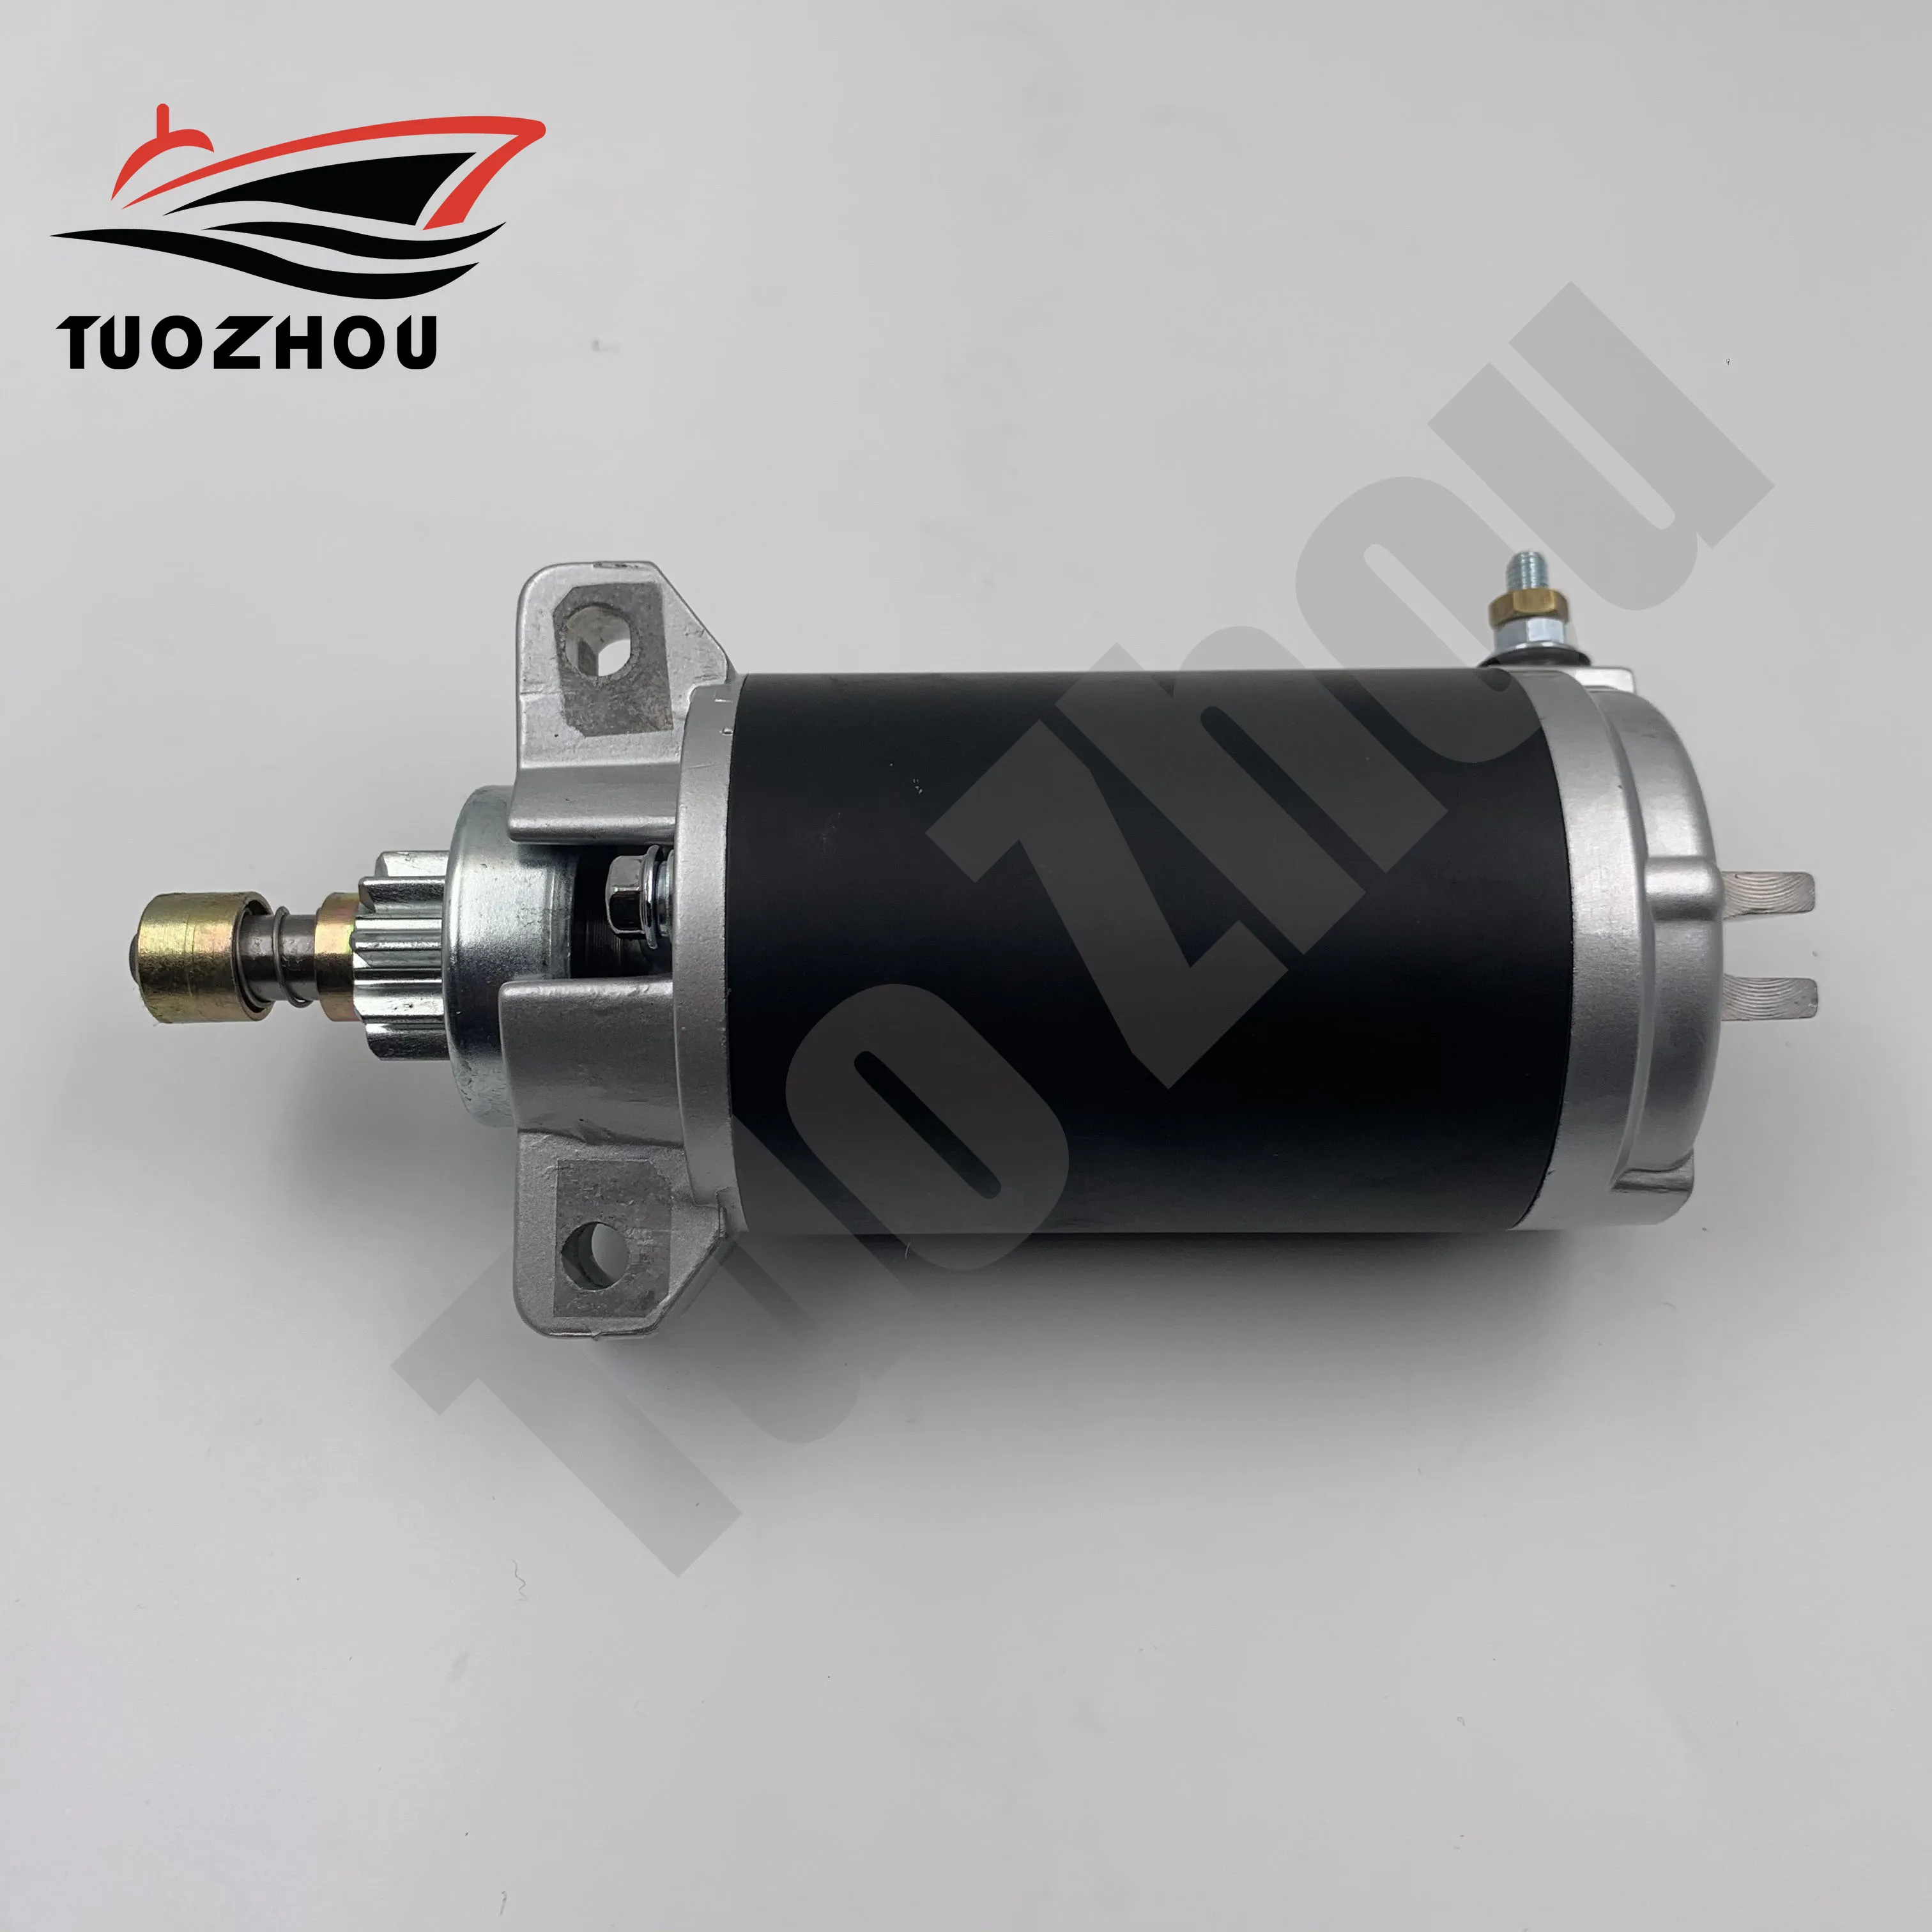 66T-81800-03 Outboard Motor Starter For YAMAHA Outboard Engine T40 66T-81800-03 starting motor assy